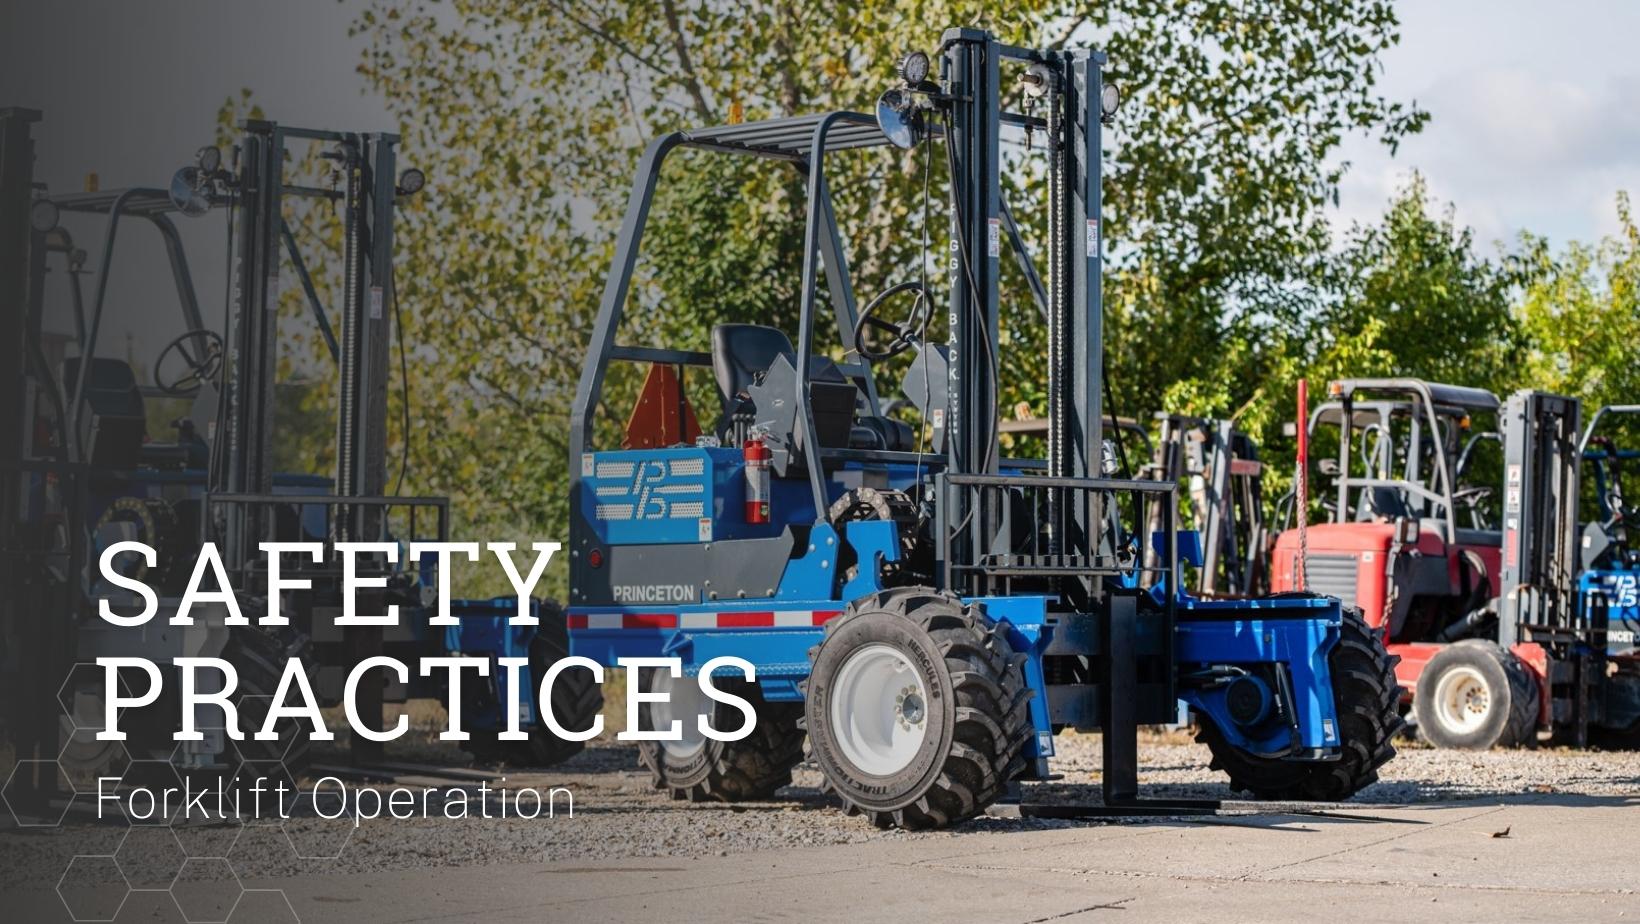 Forklifts in the background, picture sys Safety Practices Forklift Operations.